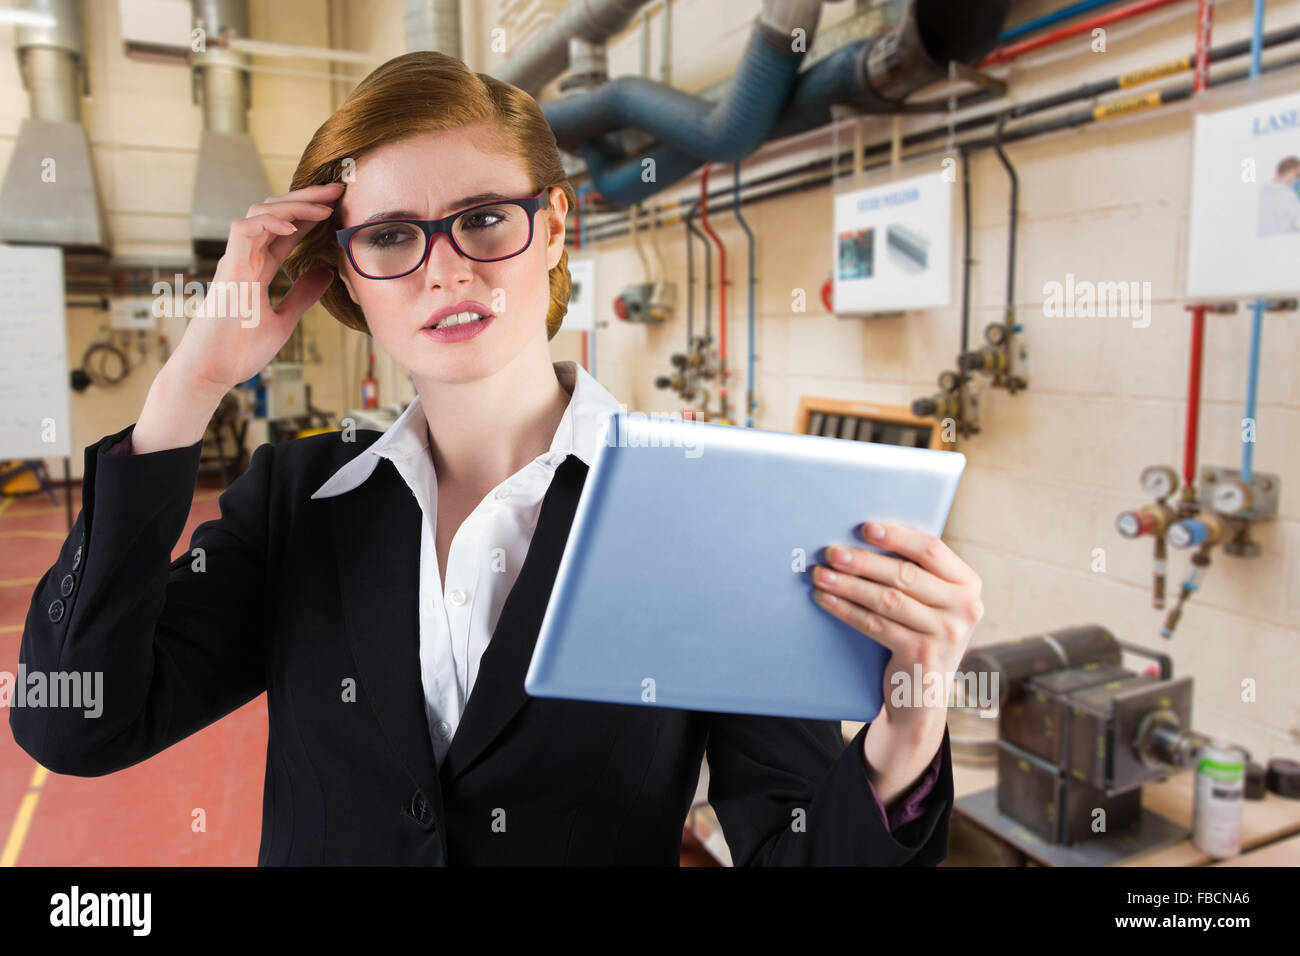 Composite image of redhead businesswoman using her tablet pc Stock Photo